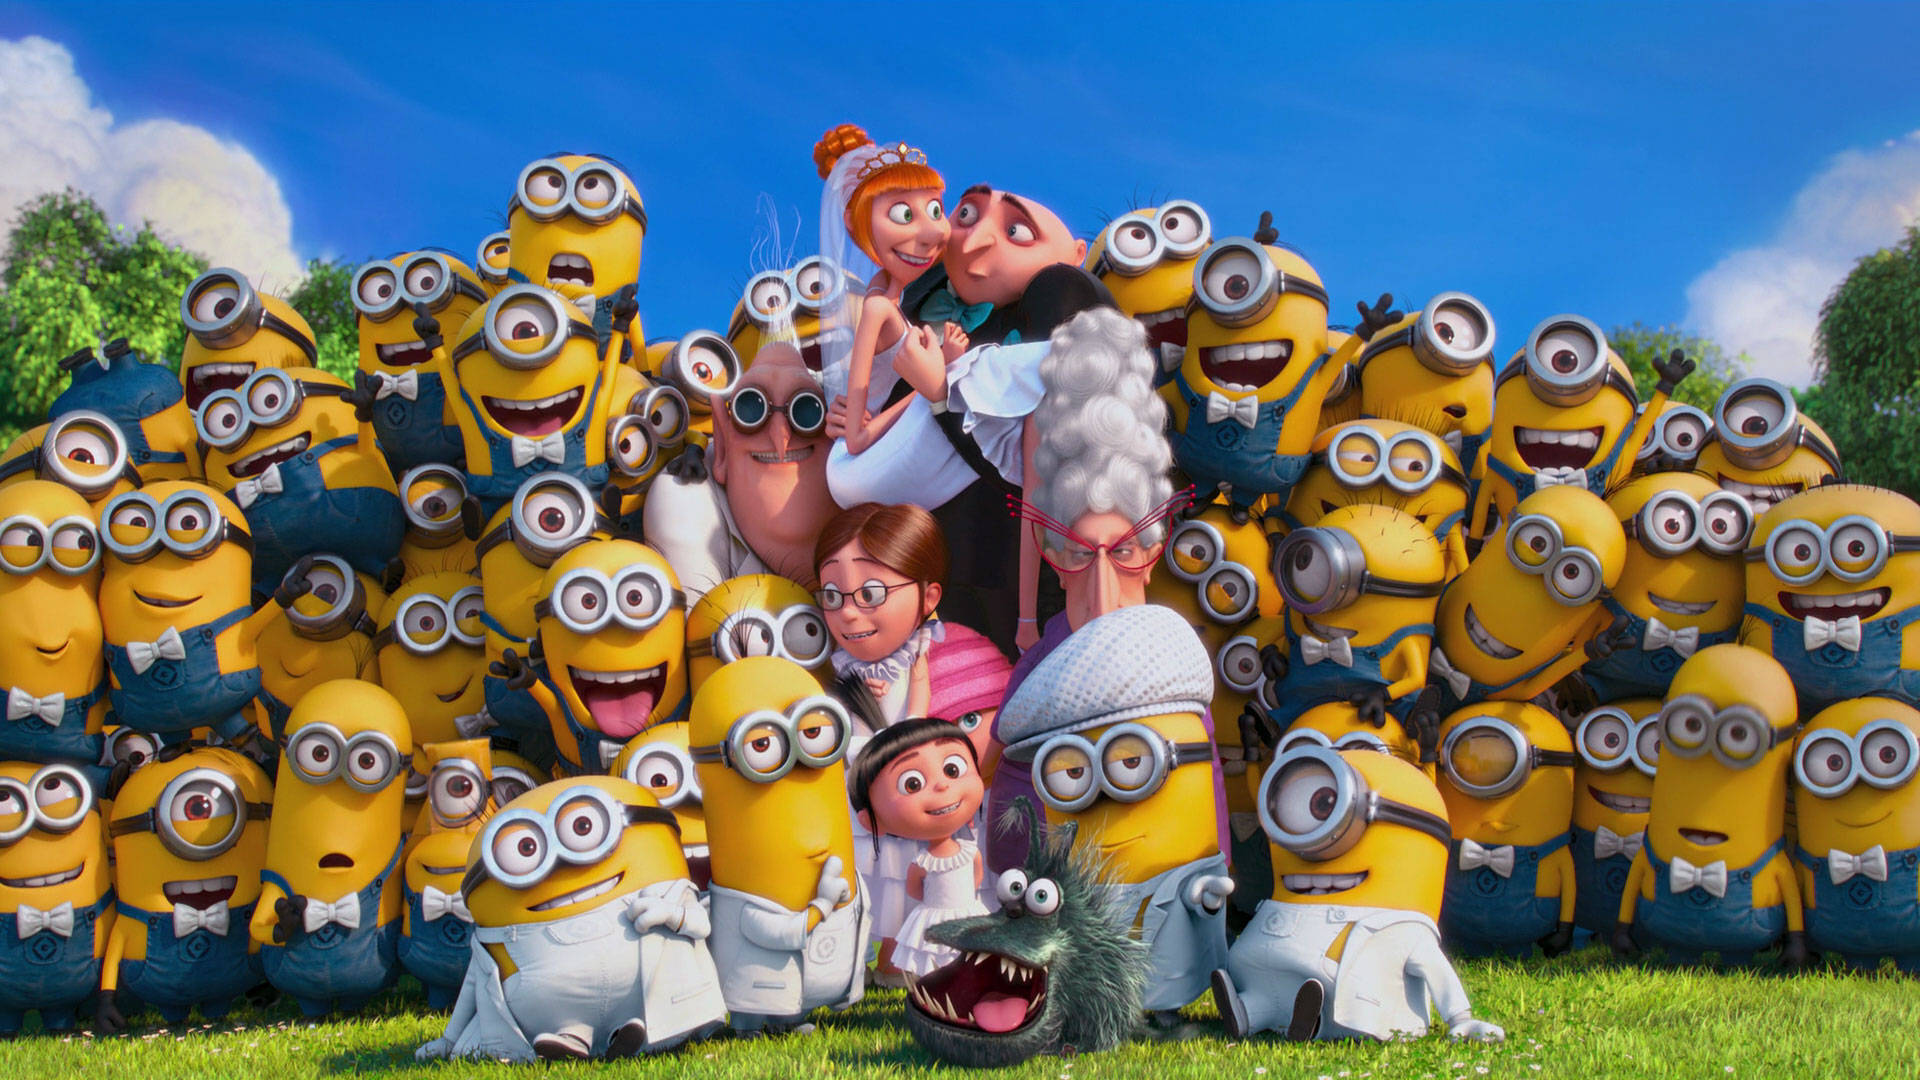 Gru's Wedding Picture Despicable Me 3 Background